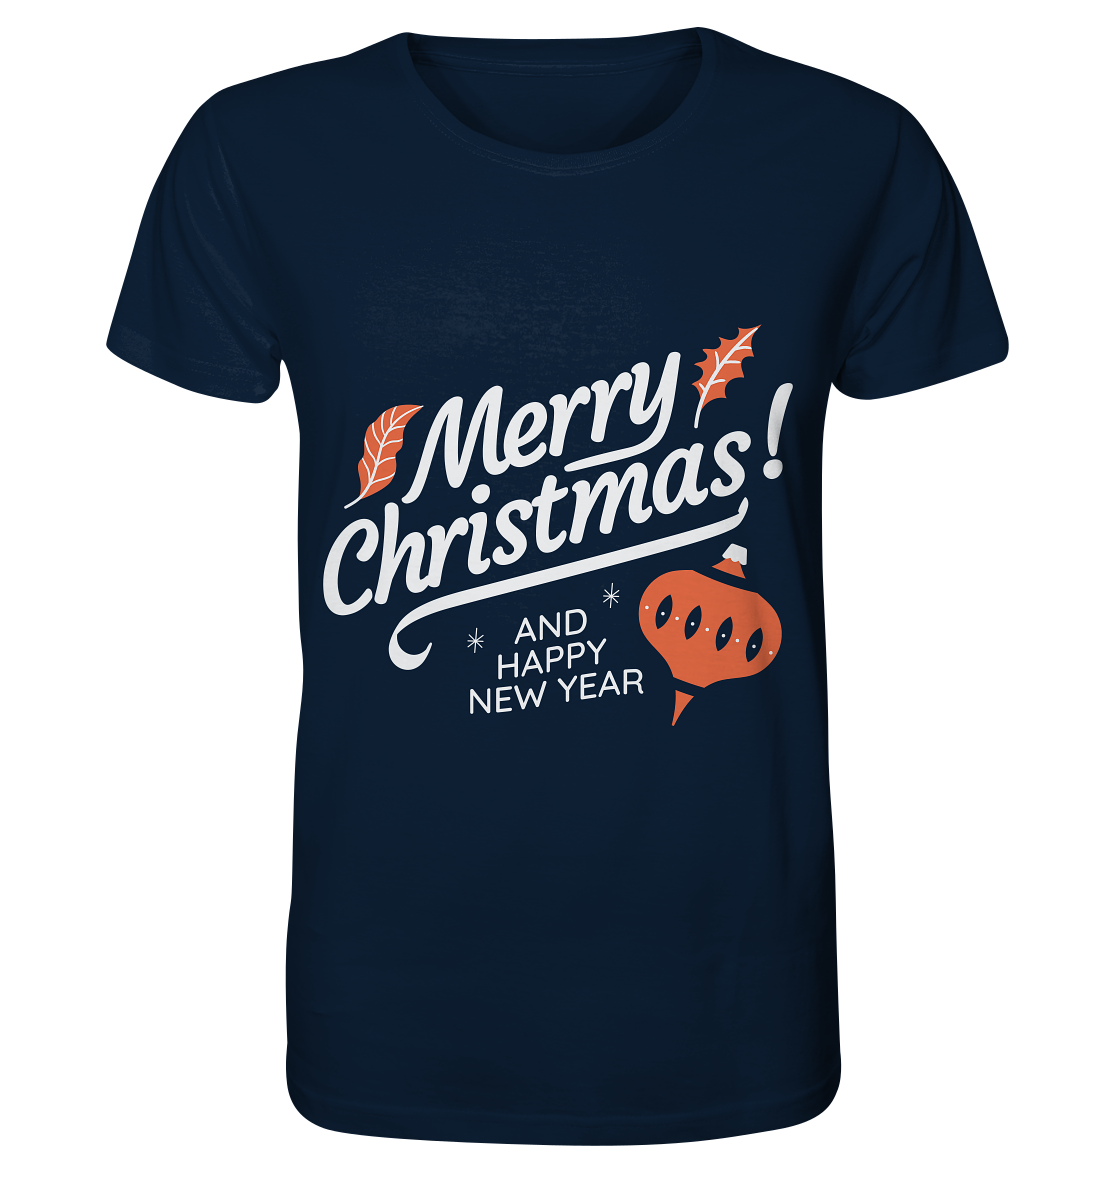 Merry Christmas and Happy New Year, Merry Christmas and Happy New Year - Organic Shirt